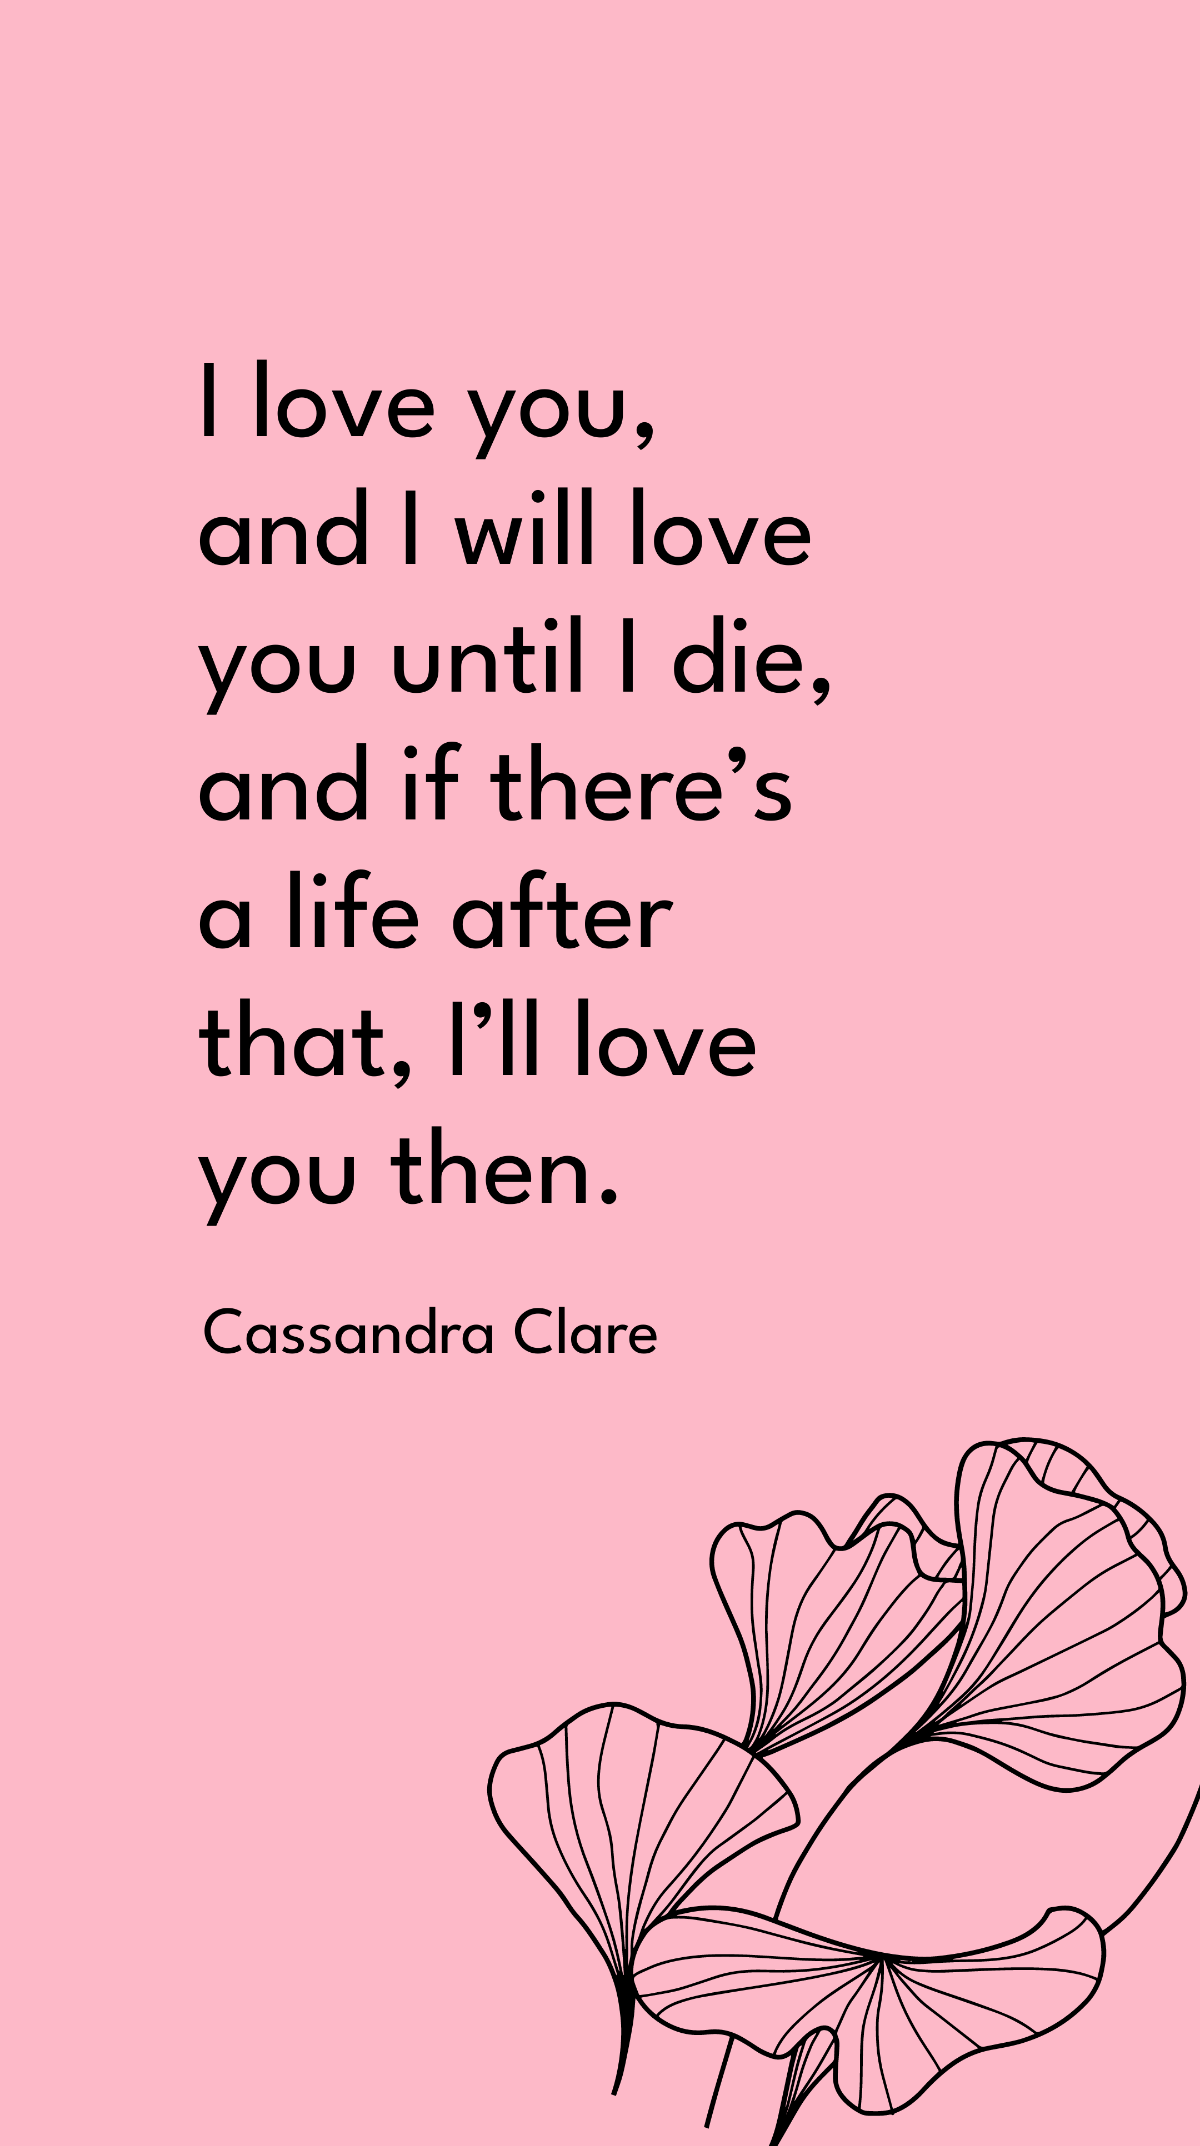 Cassandra Clare - I love you, and I will love you until I die, and if there’s a life after that, I’ll love you then.